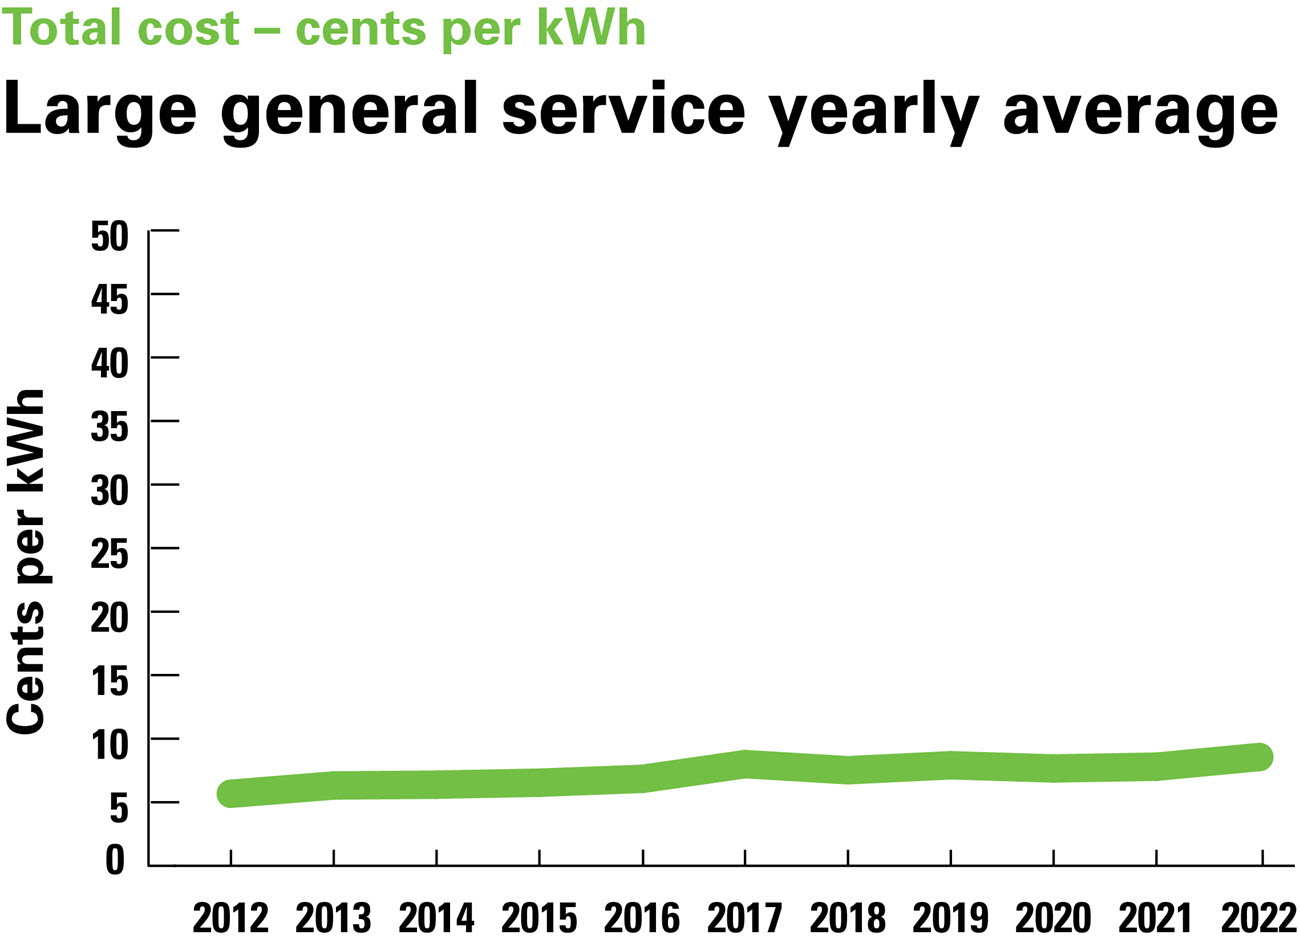 Line graph showing large general service yearly average total cost in cents per Kwh 